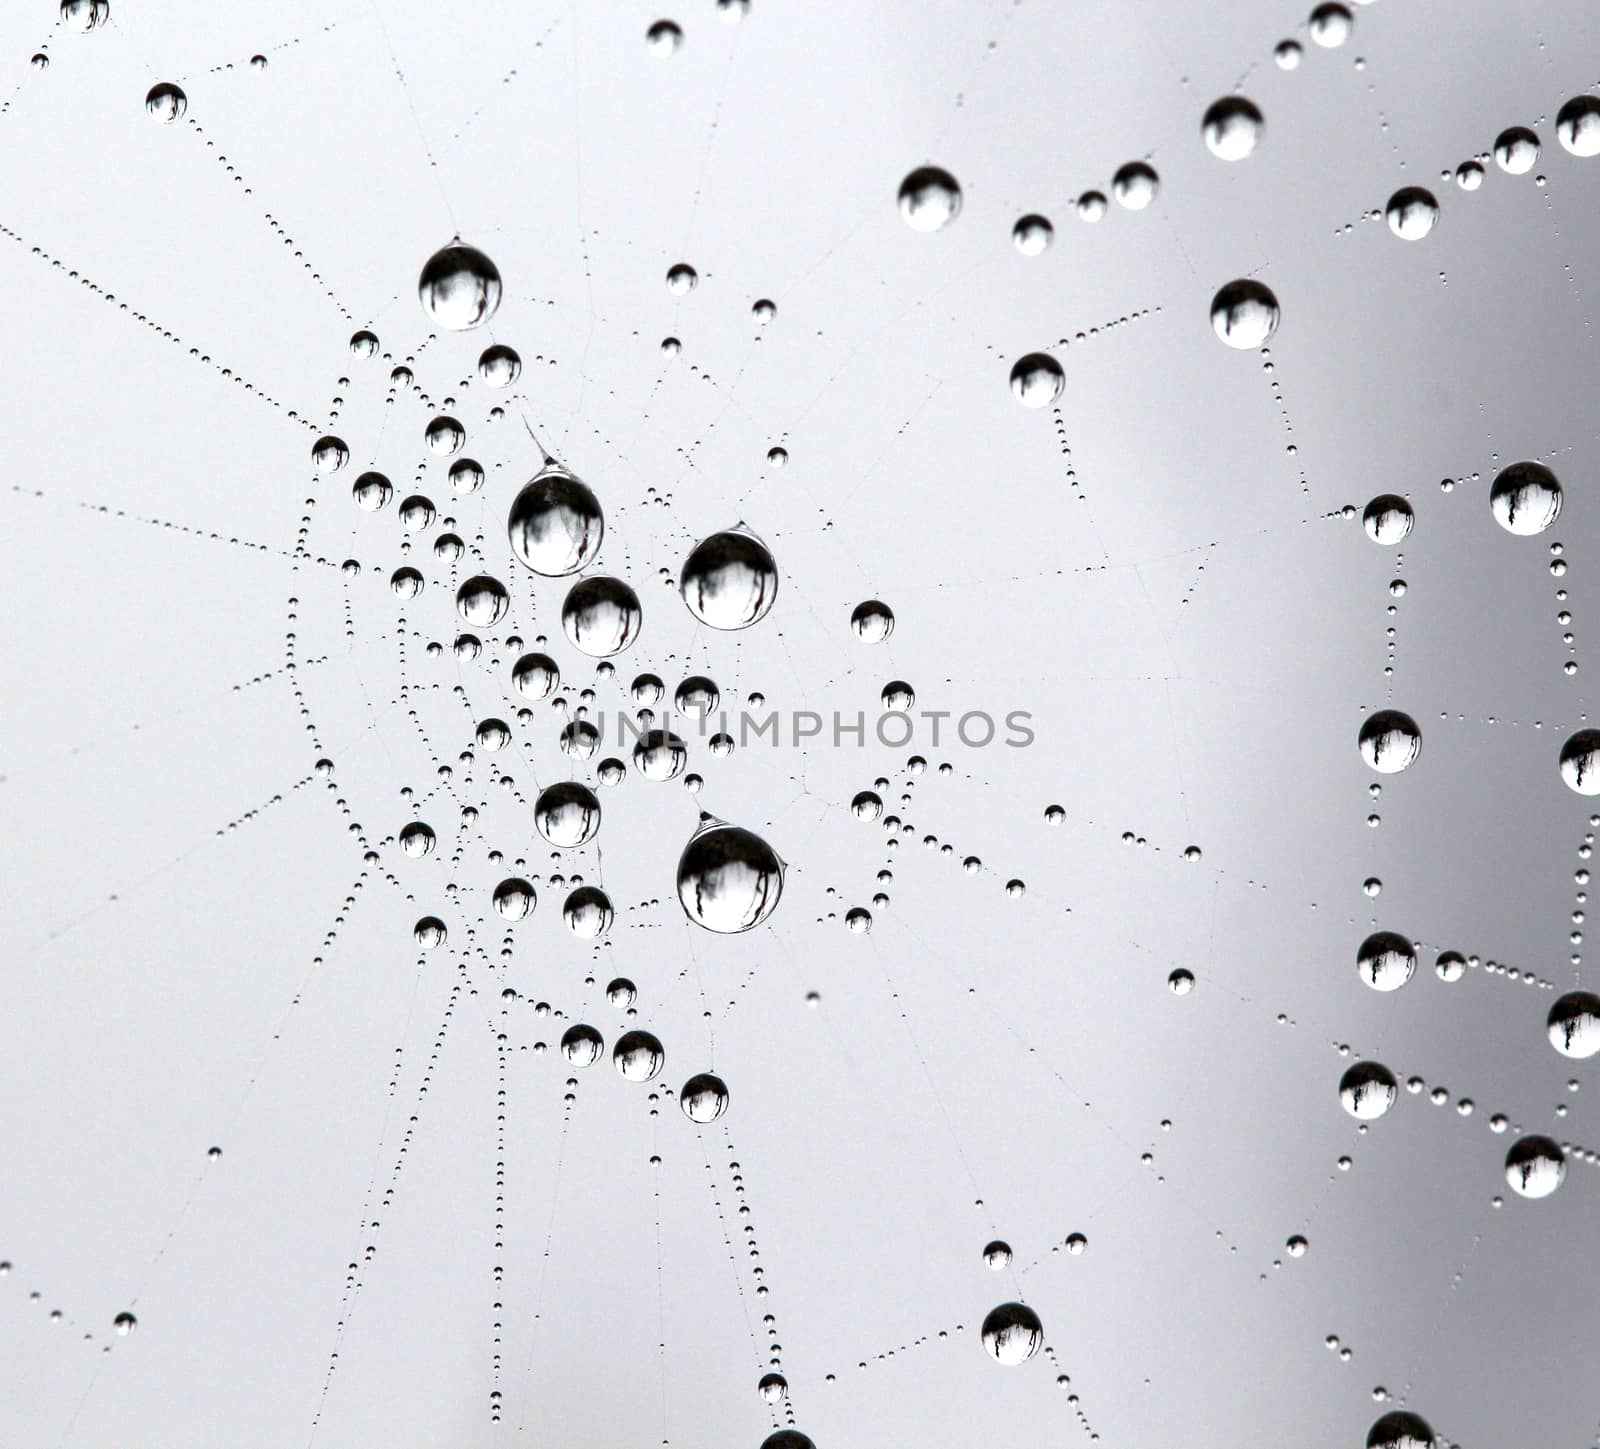 picture of a The spider web with dew drops. Abstract background